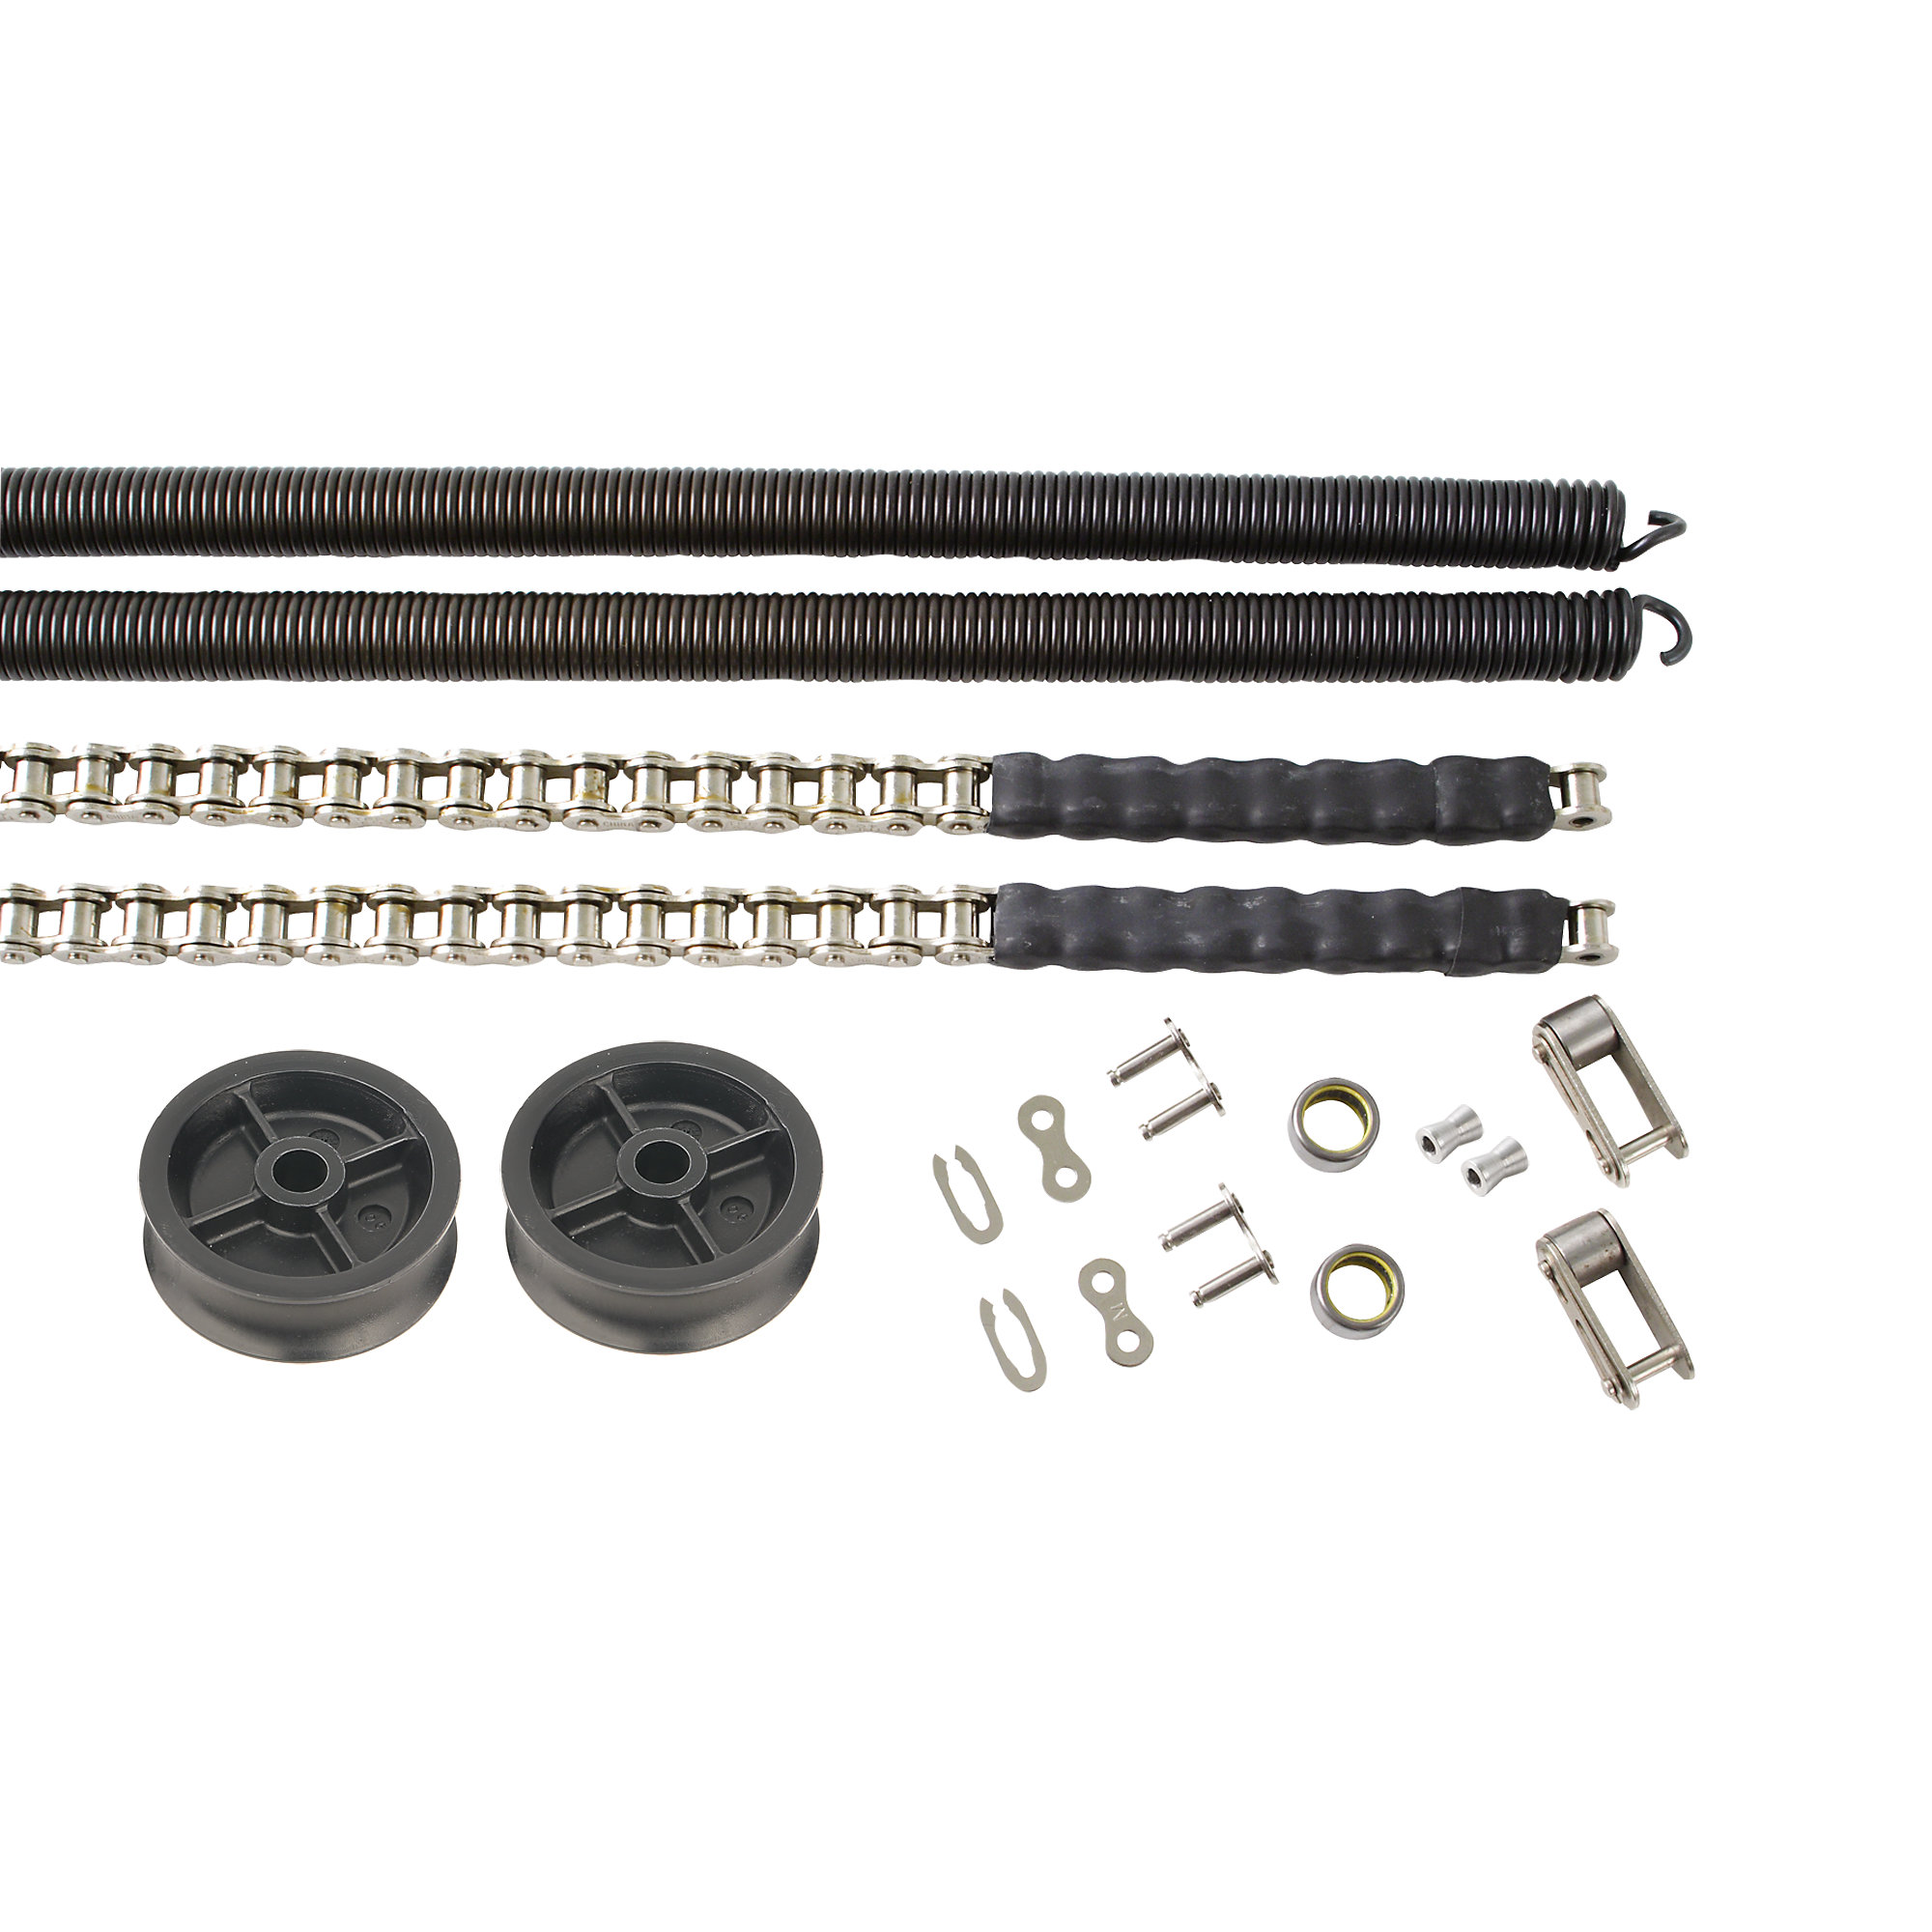 Spring Kit For Pedal Arms with Mega Bearings